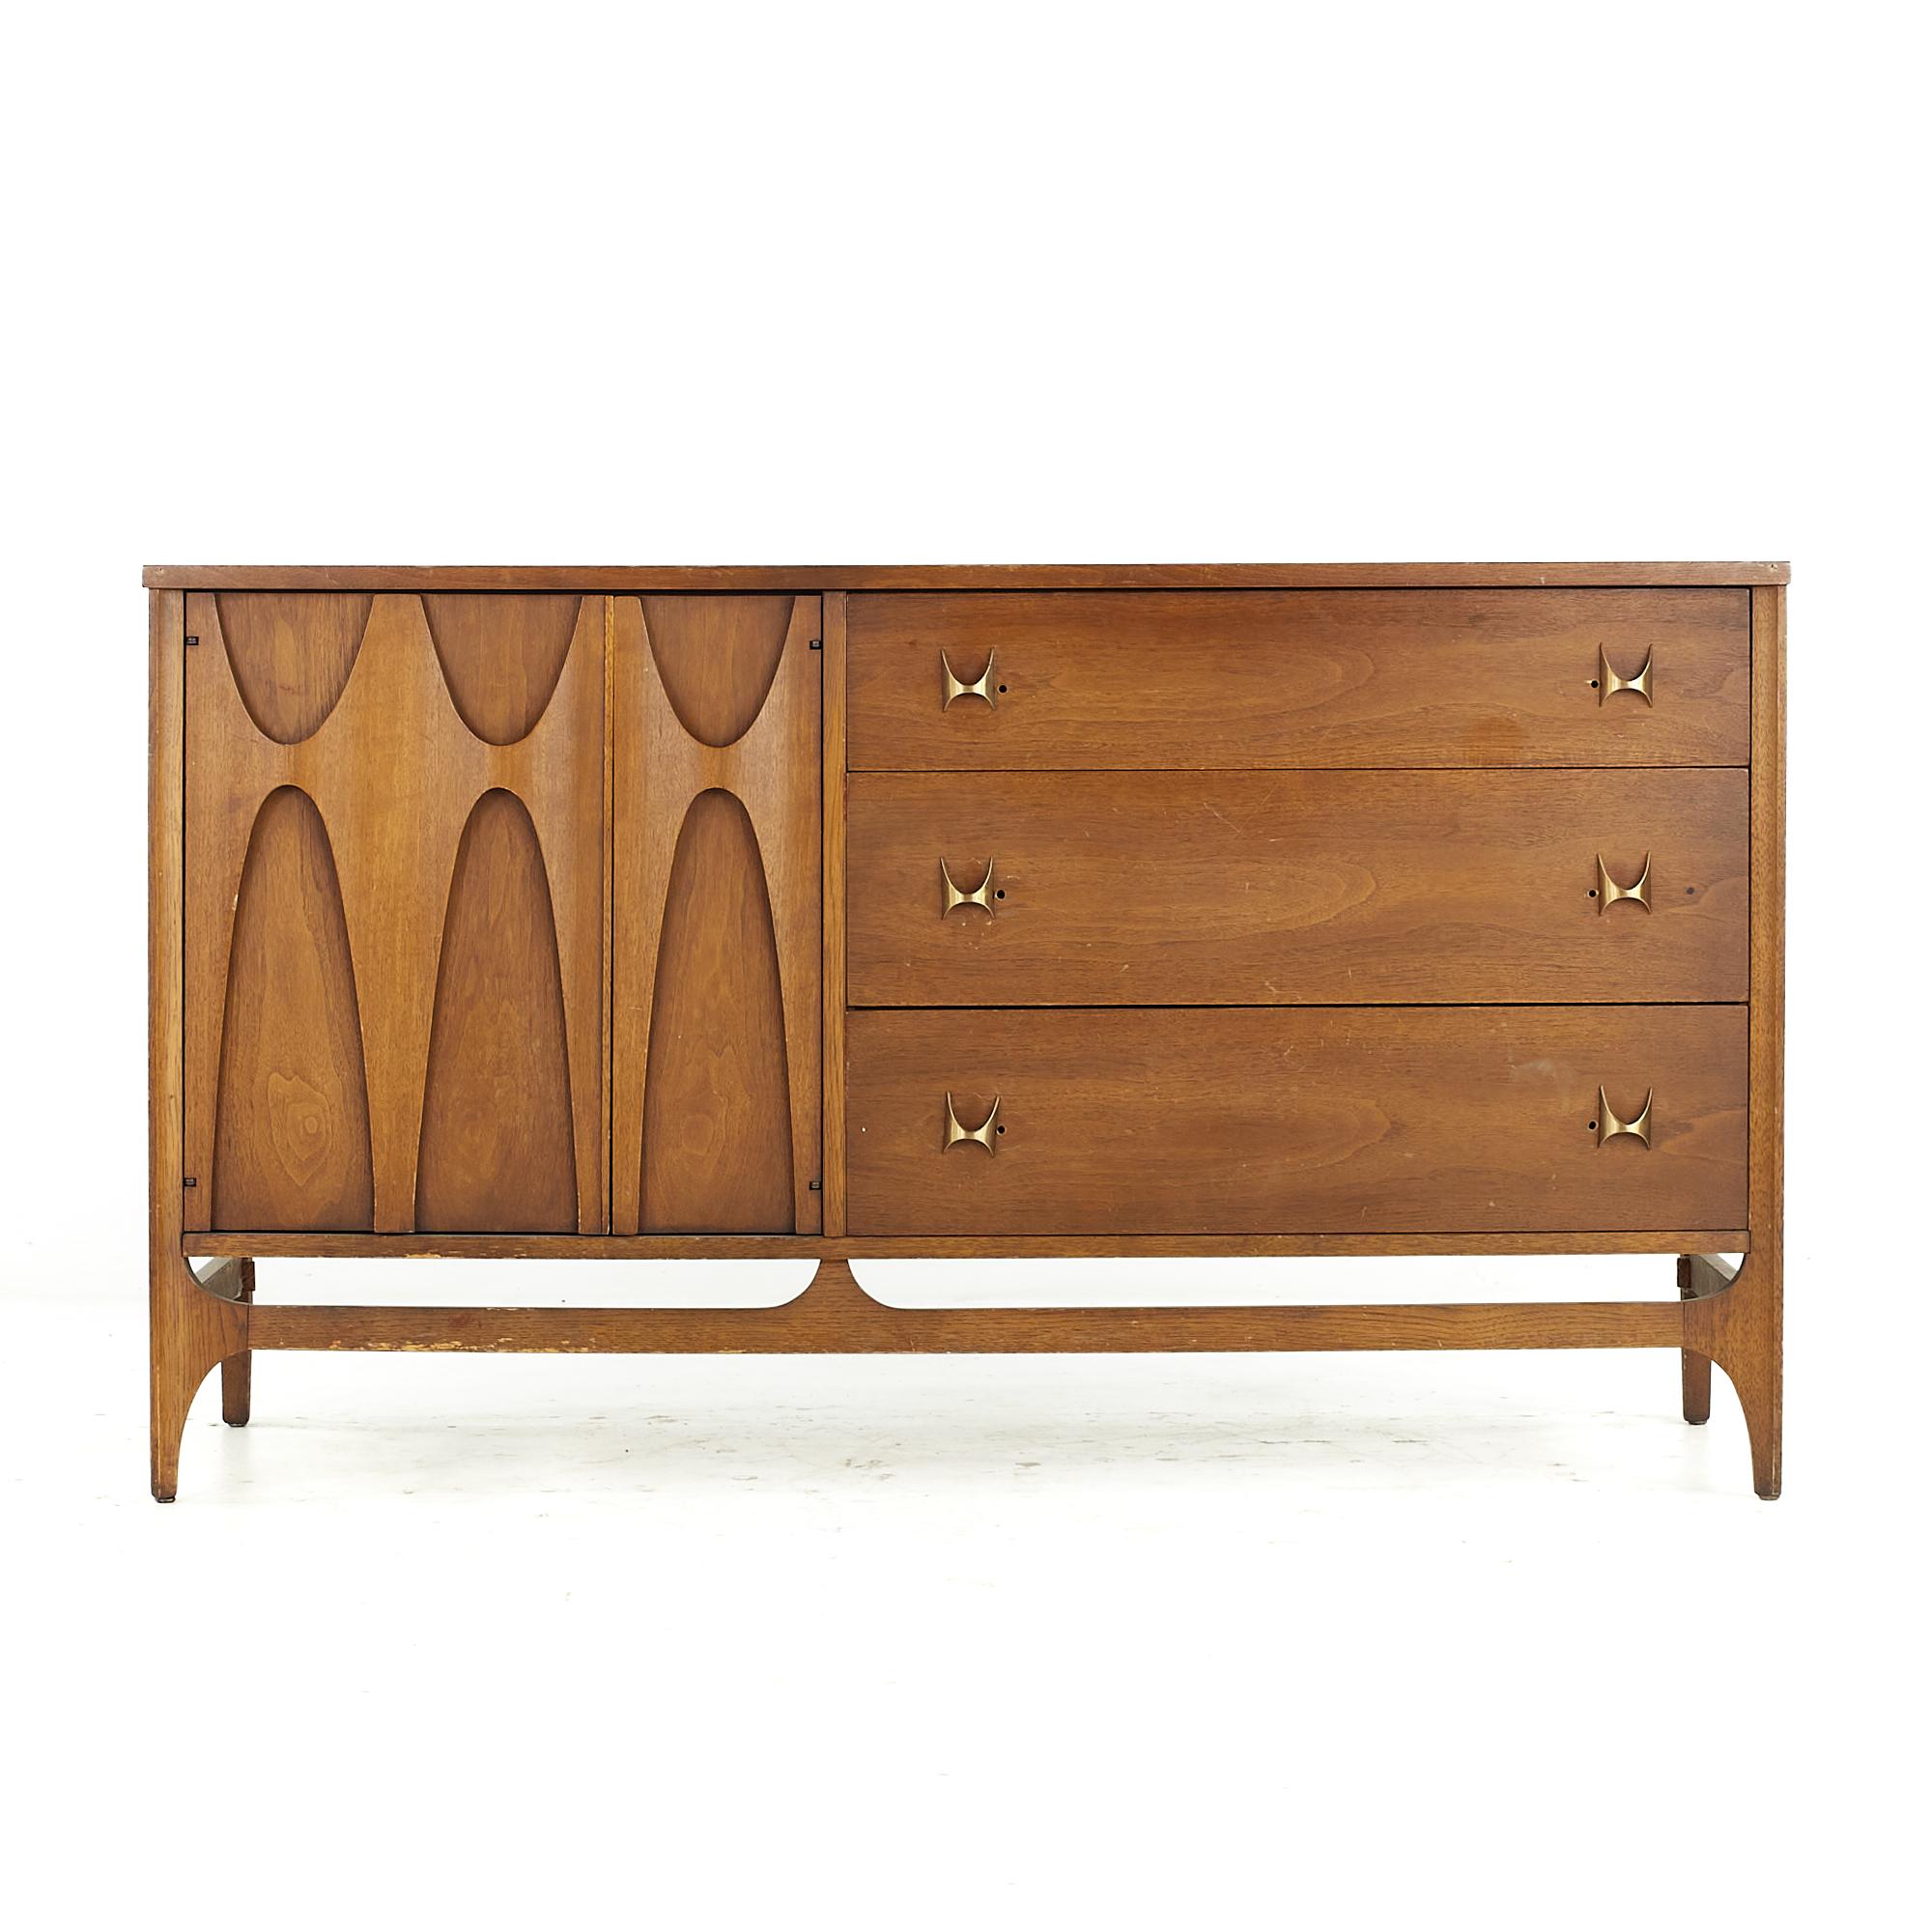 Broyhill Brasilia midcentury Walnut and Brass Offset Buffet

This buffet measures: 54 wide x 19 deep x 31 inches high

All pieces of furniture can be had in what we call restored vintage condition. That means the piece is restored upon purchase